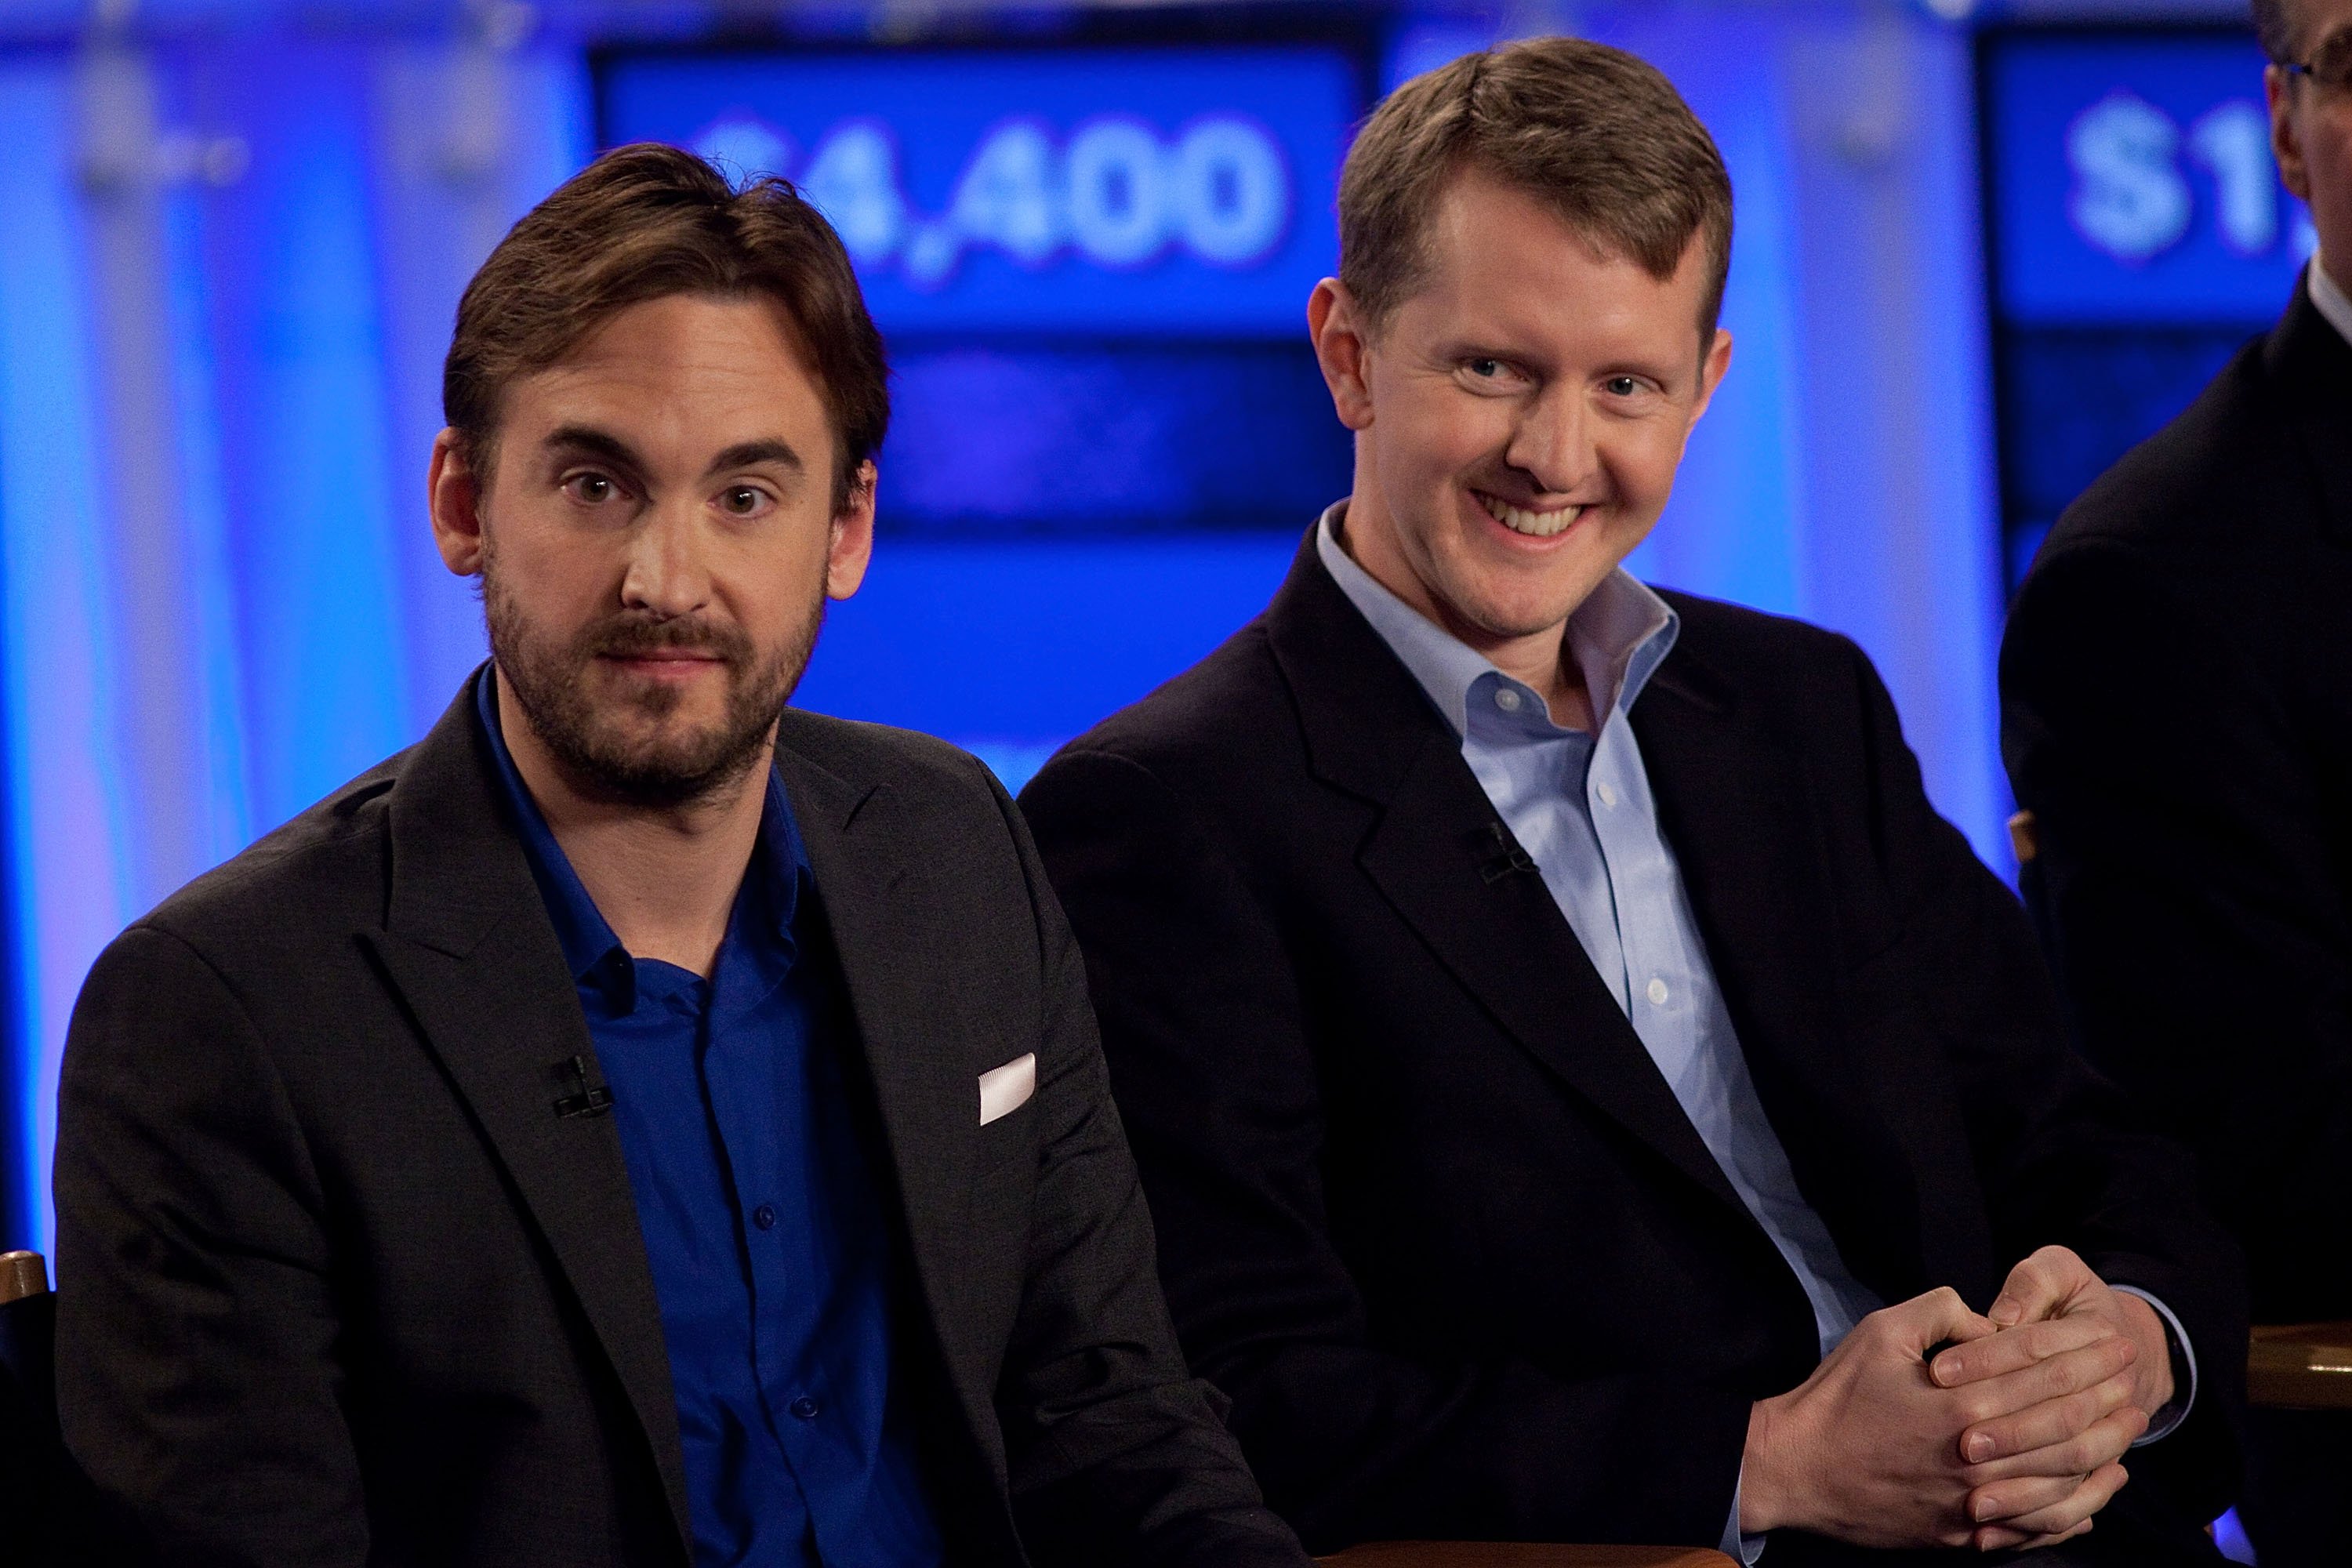 Brad Rutter and Ken Jennings attends a press conference for "Jeopardy!" in Yorktown Heights, New York on January 13, 2011 | Photo: Getty Images